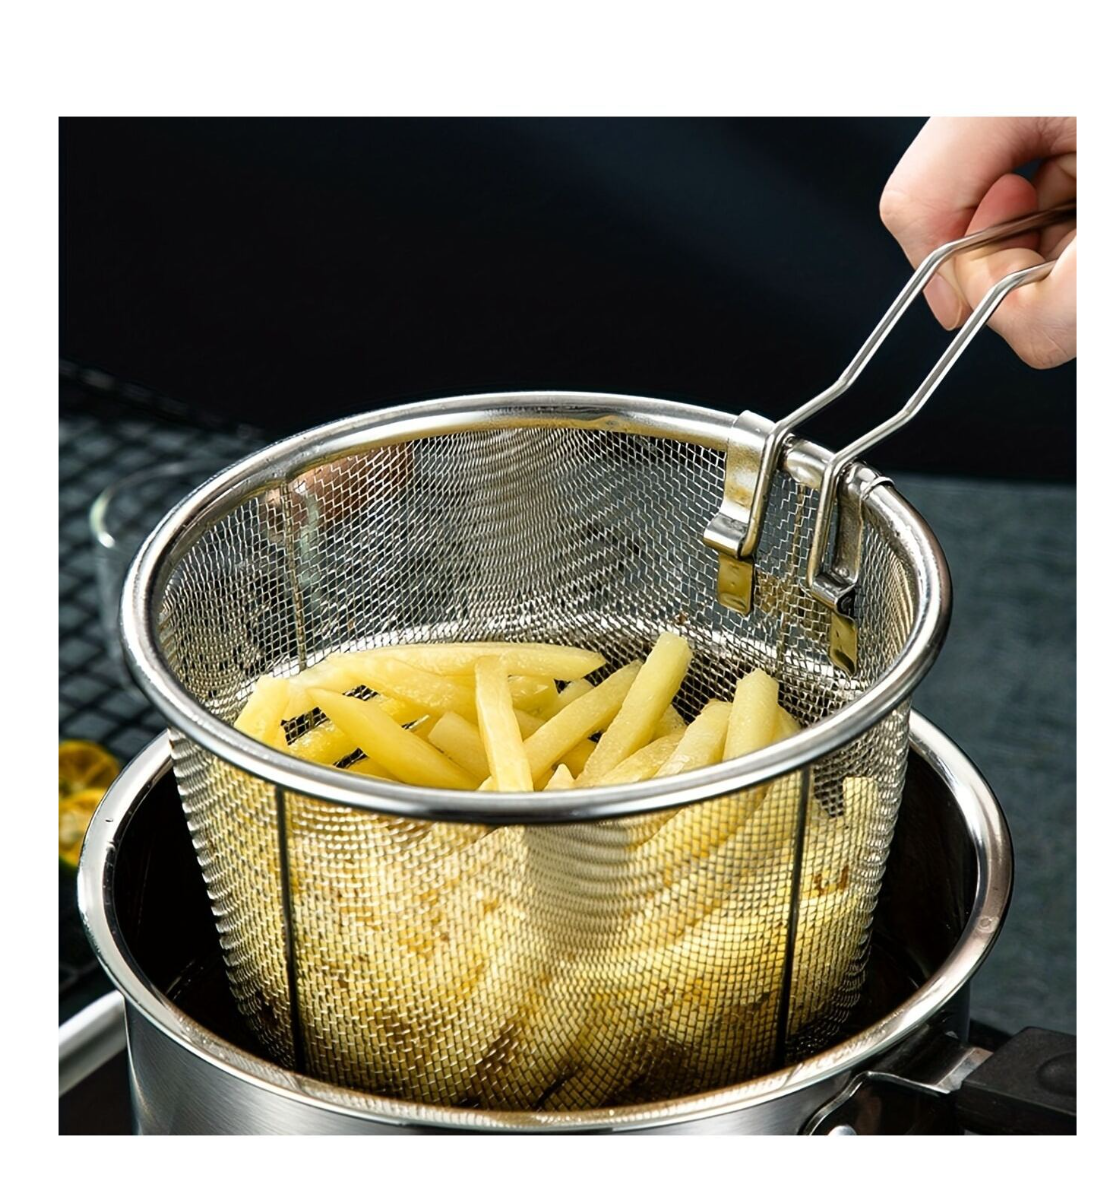 Master the Art of Crispy Delights: Stainless Steel Kitchen Deep Frying Basket with Fine Mesh Spider Strainer – Your Culinary Wingman for Perfectly Fried Chicken, Dumplings, Noodles, and More!